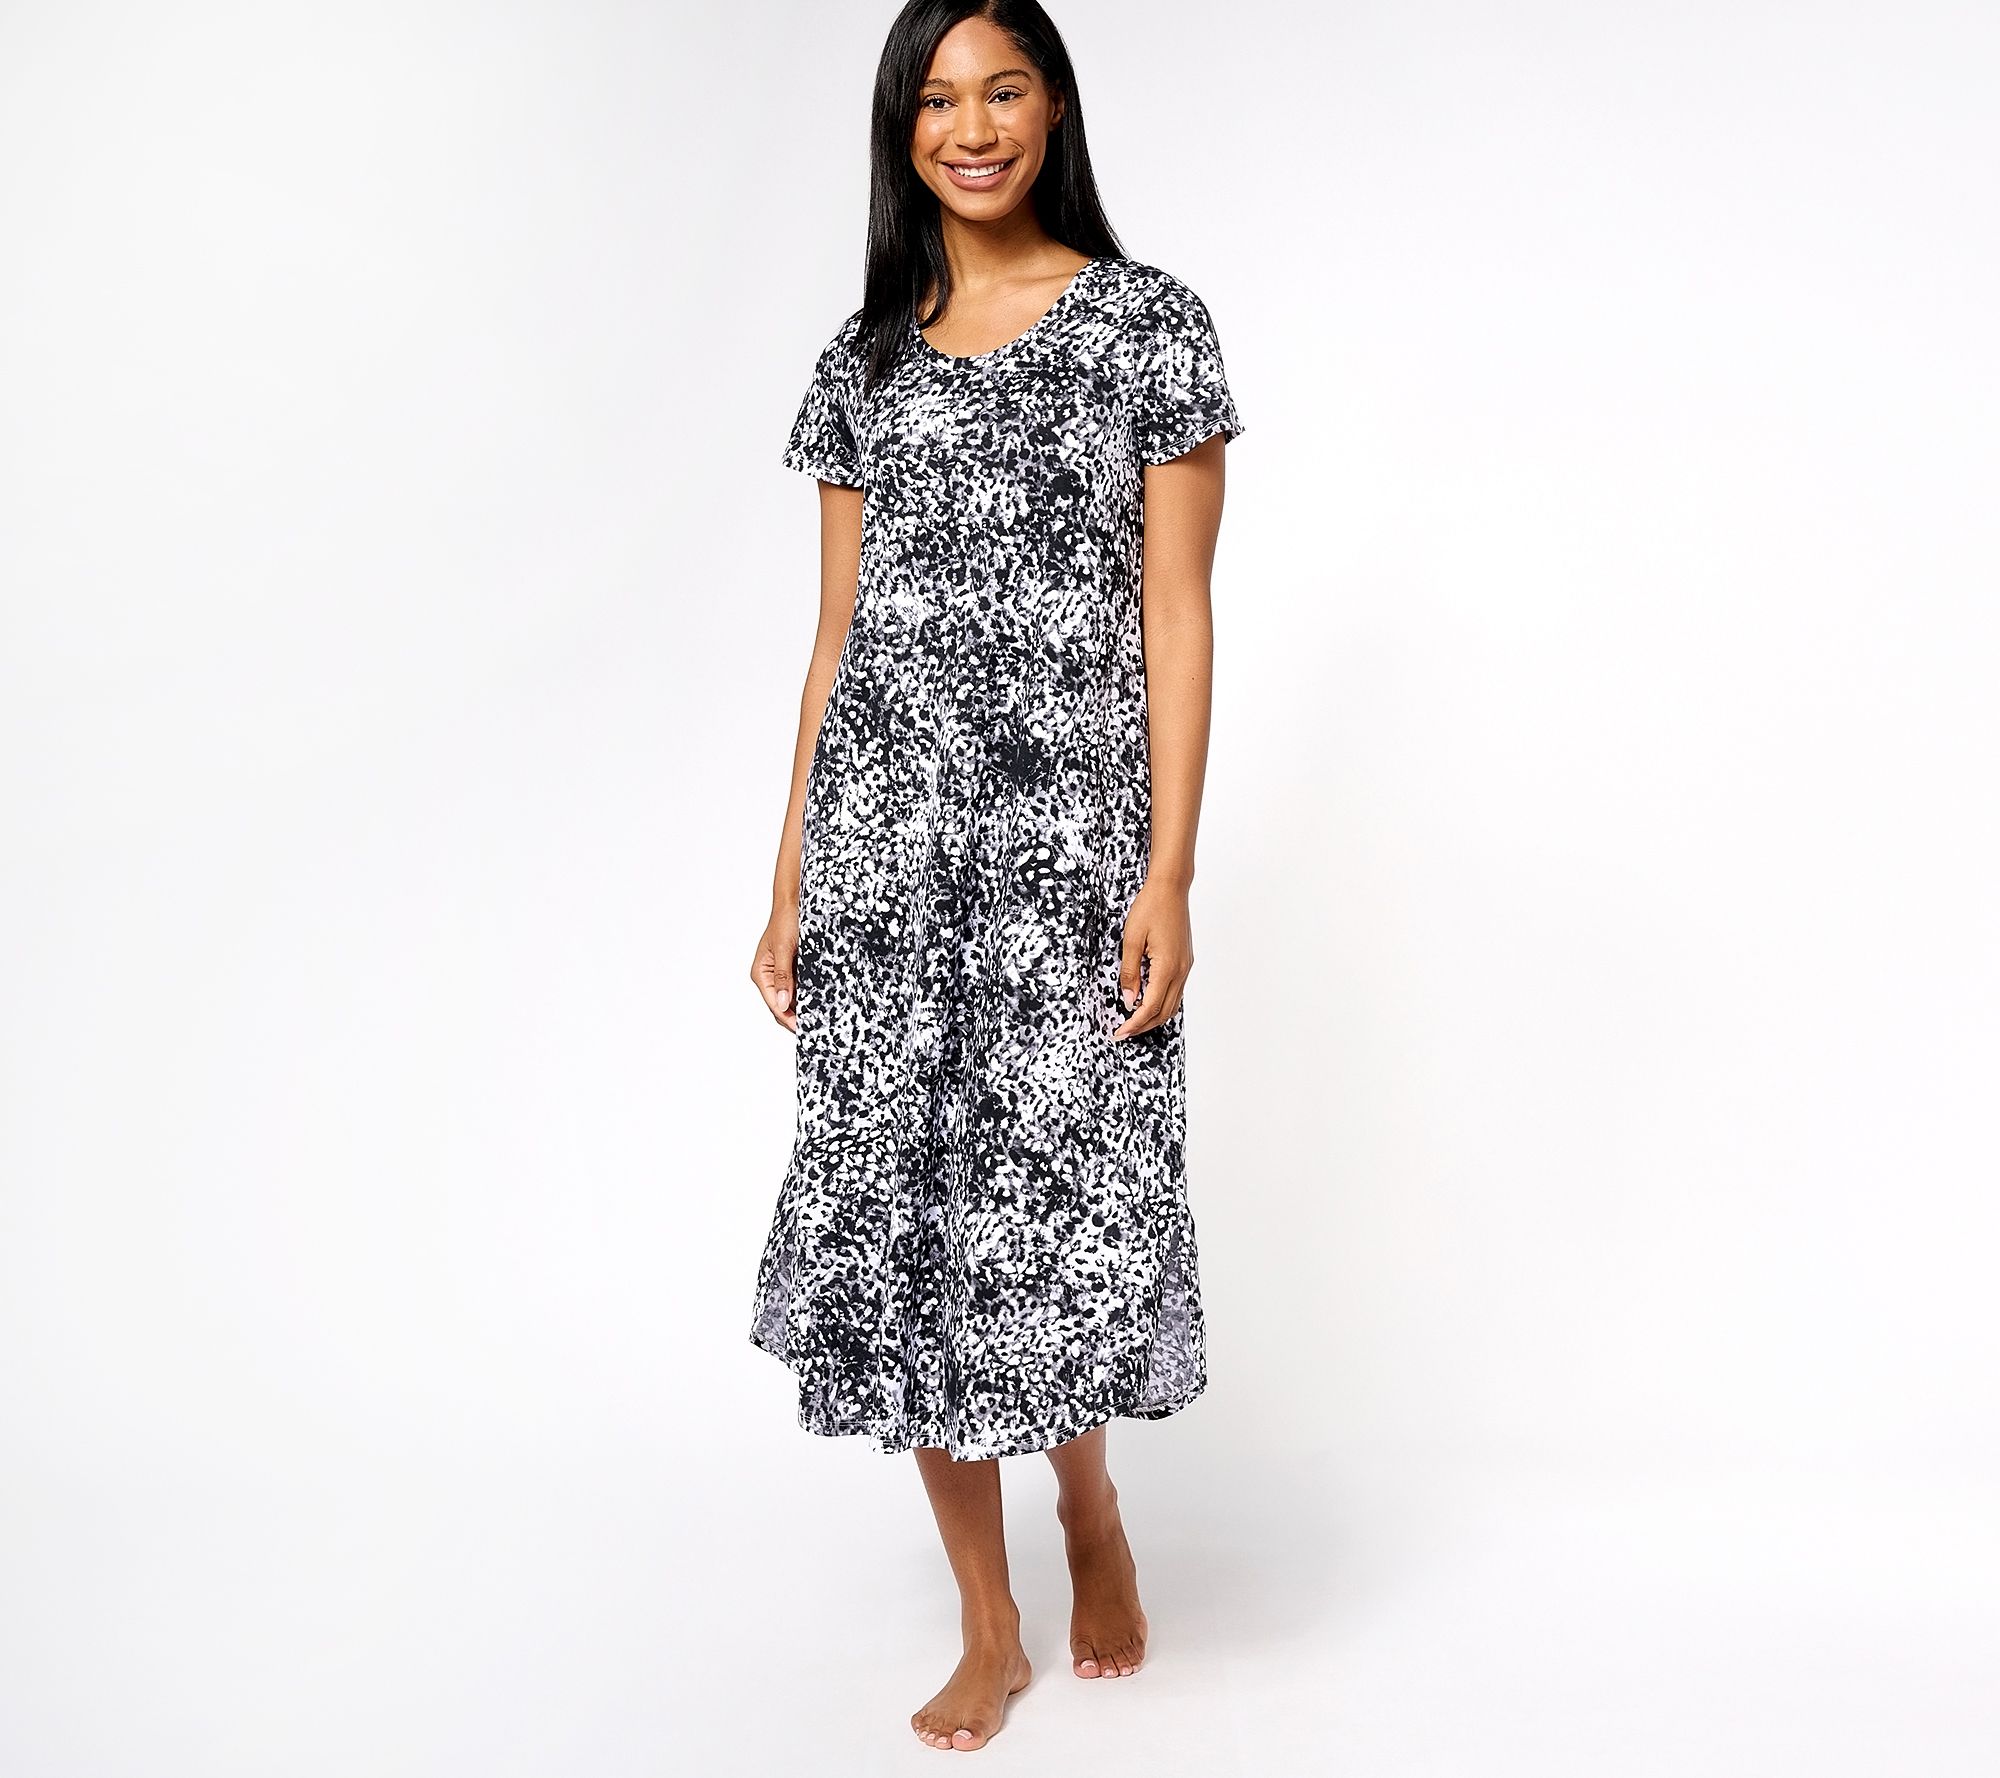 Women's Clothing On Sale  Clearance - Shop today! – Clothes